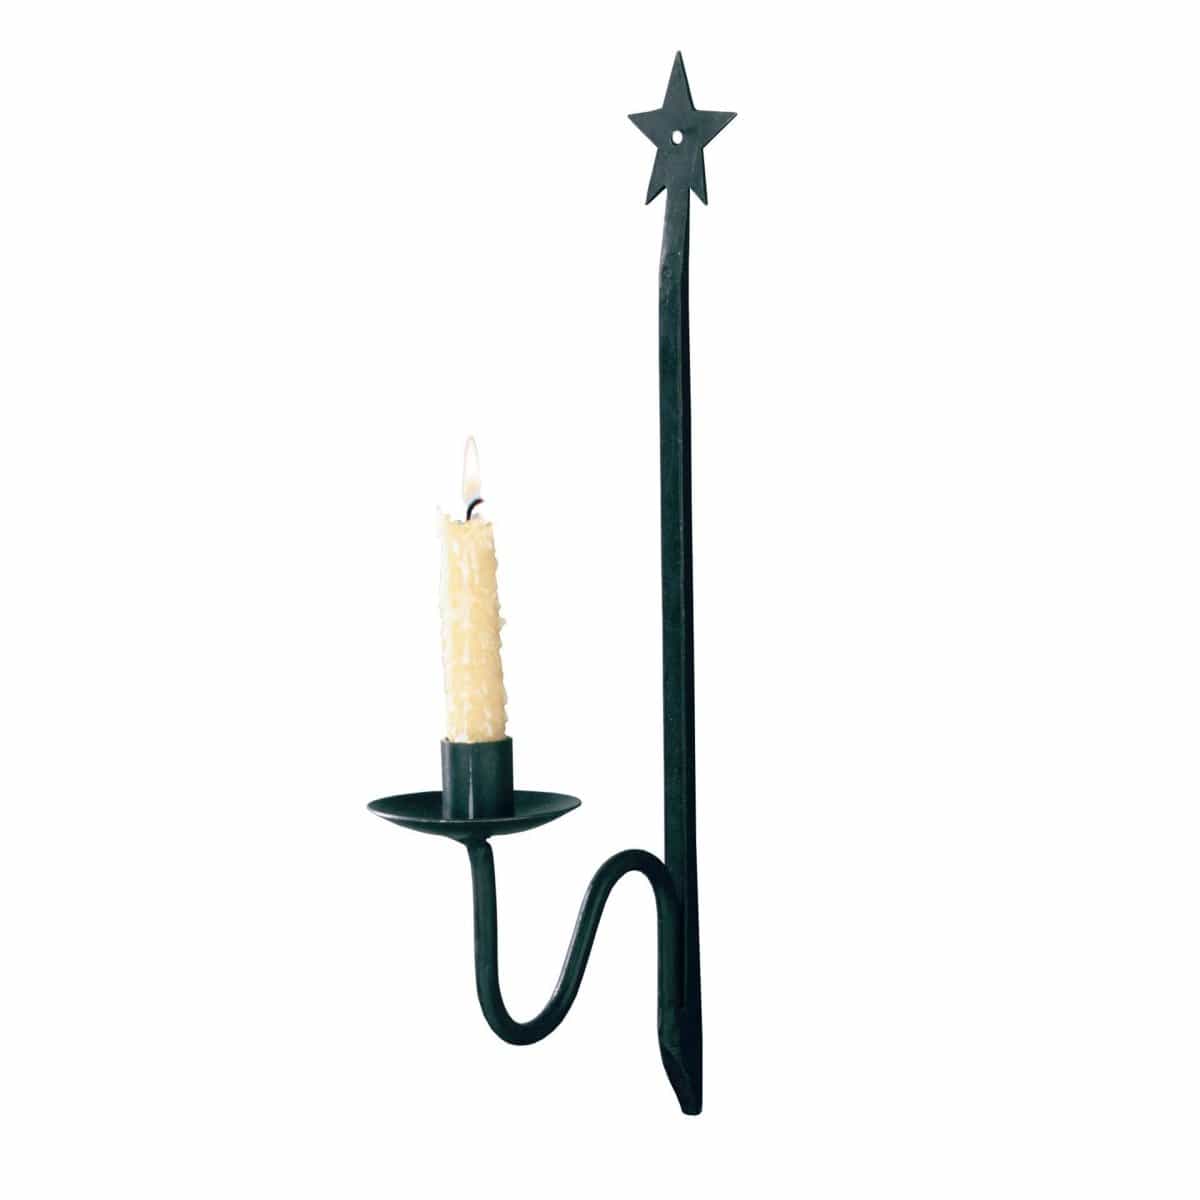 Forged Iron Star Wall Sconce Candle Holder For Taper Candles-Park Designs-The Village Merchant